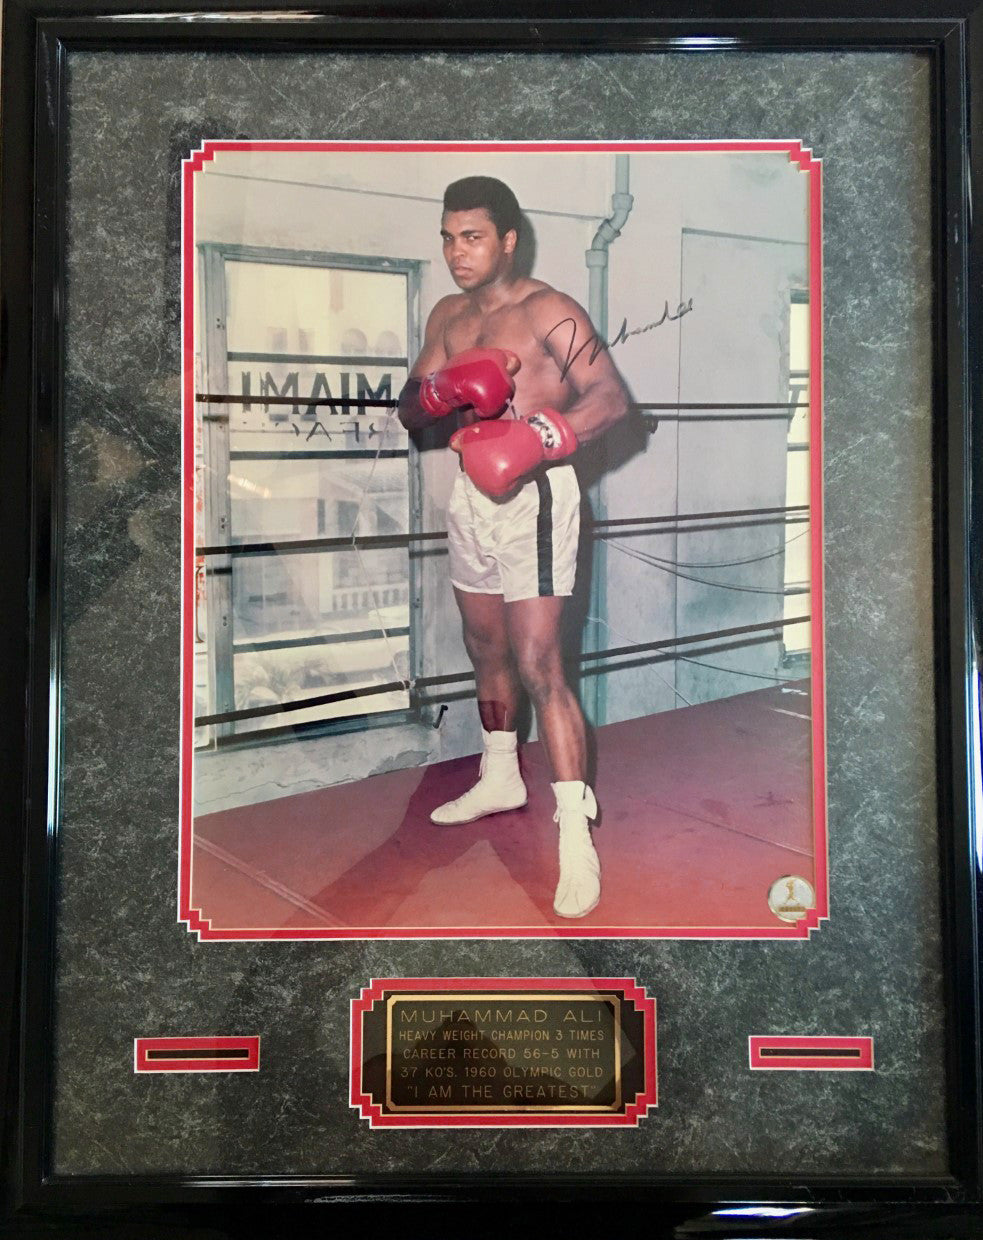 Muhammad Ali Autographed 16 x 20 Photo, Field of Dreams certified: SOLD!